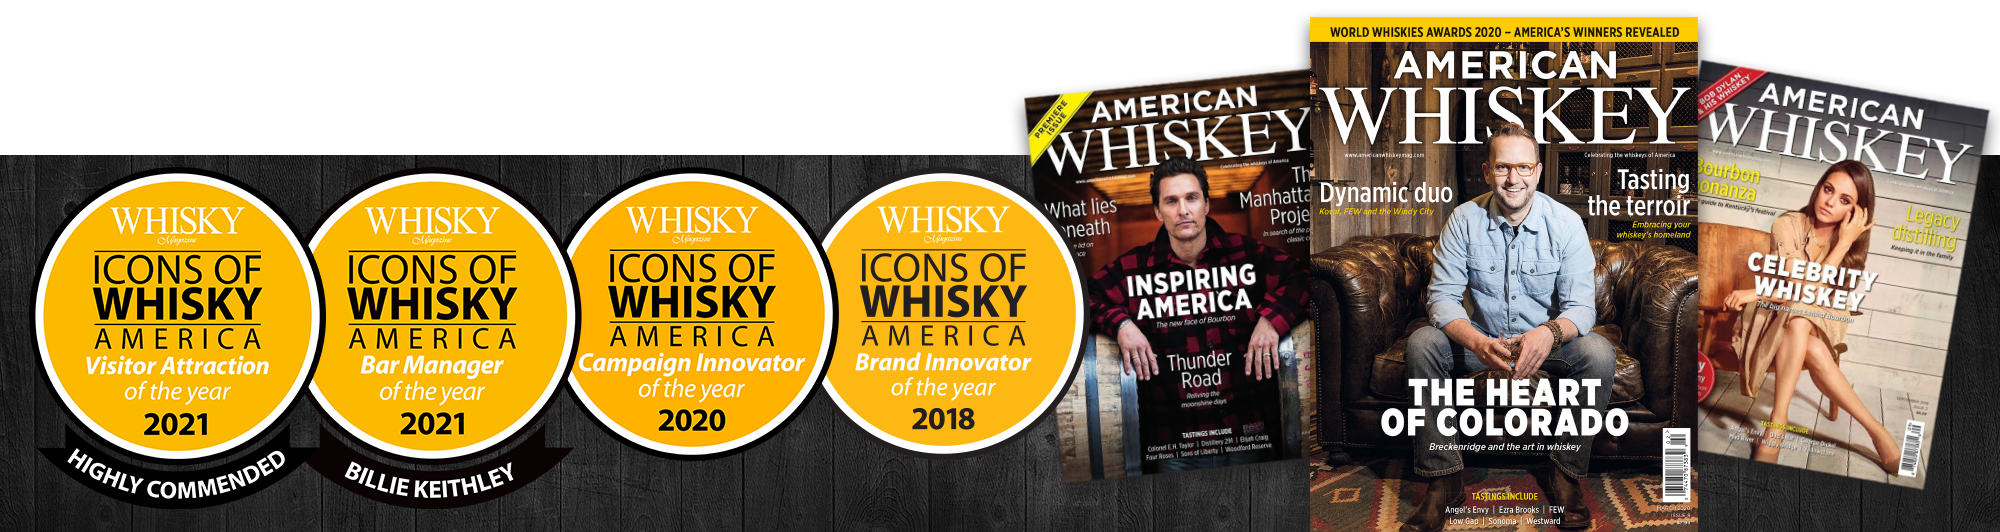 American whiskey magazines with awards